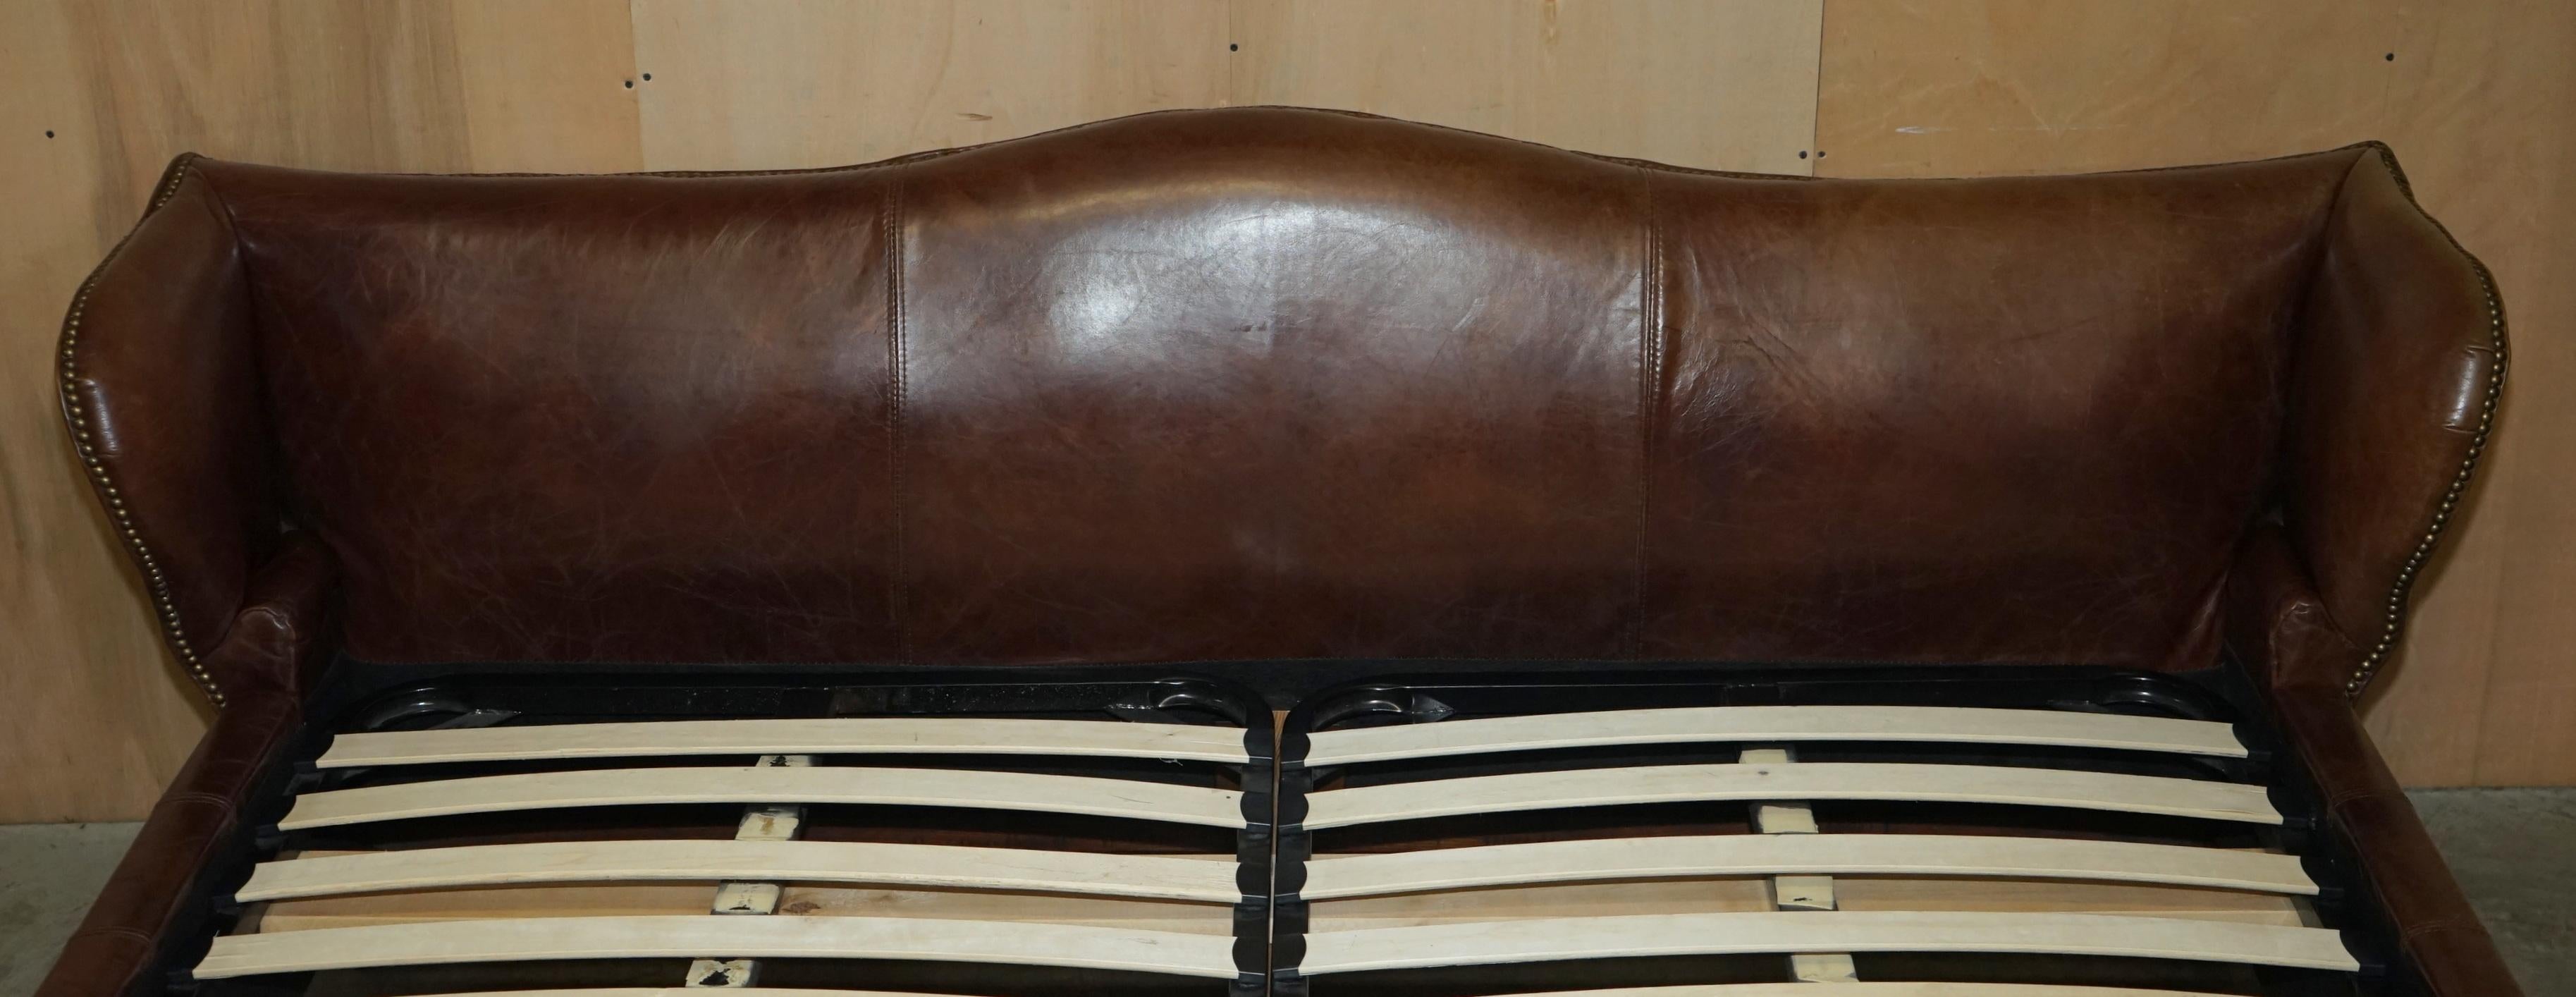 VERY RARE HUGE HAND DYED BROWN LEATHER WiNGBACK SUPER KING SIZE BED FRAME 4